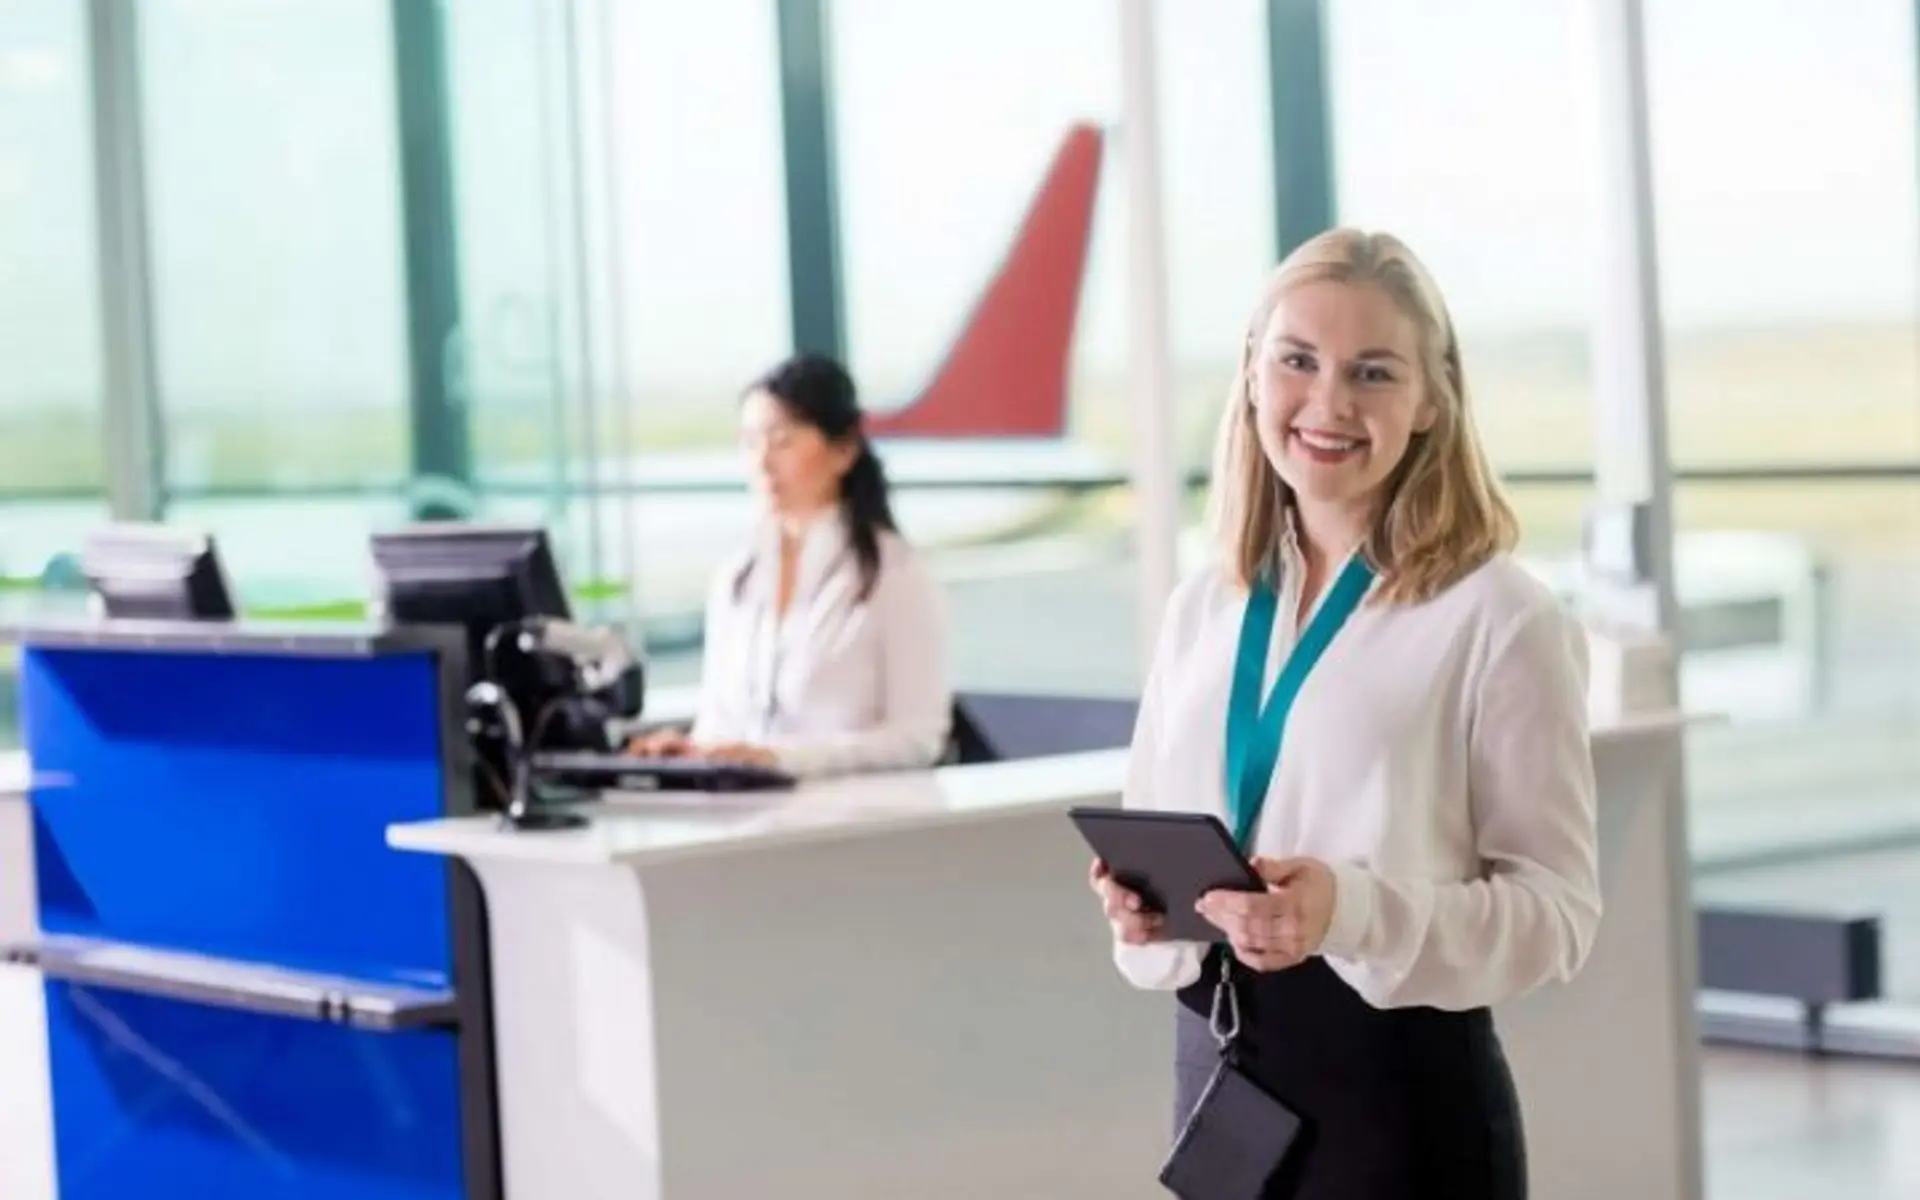 Airlines Articles - Travel as a VIP with a Meet & Greet service